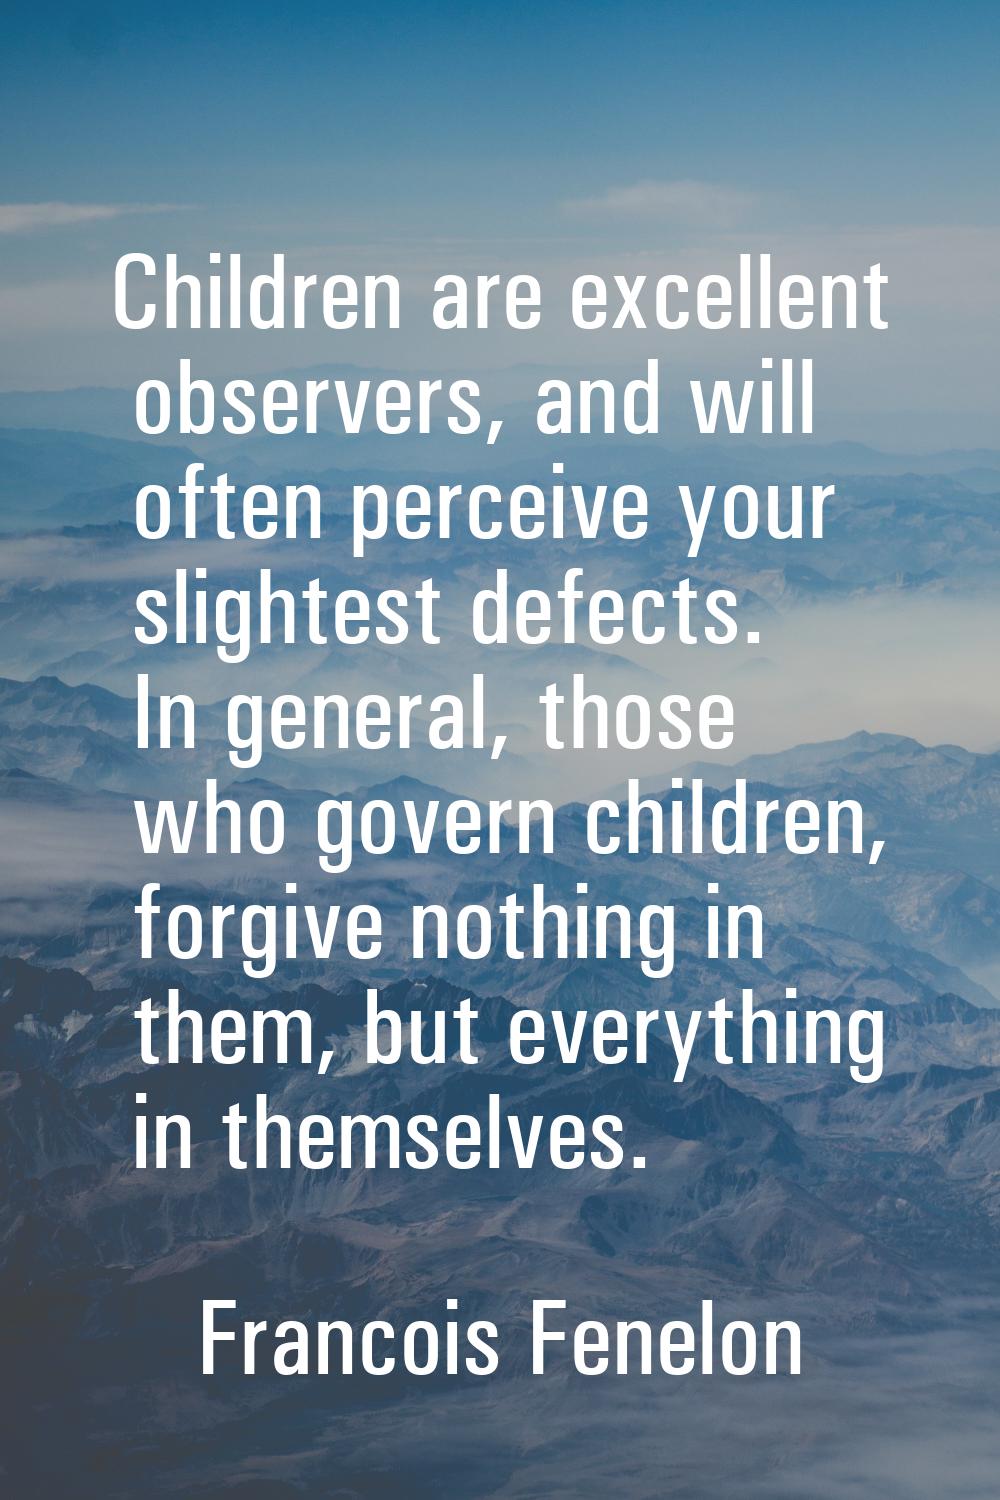 Children are excellent observers, and will often perceive your slightest defects. In general, those